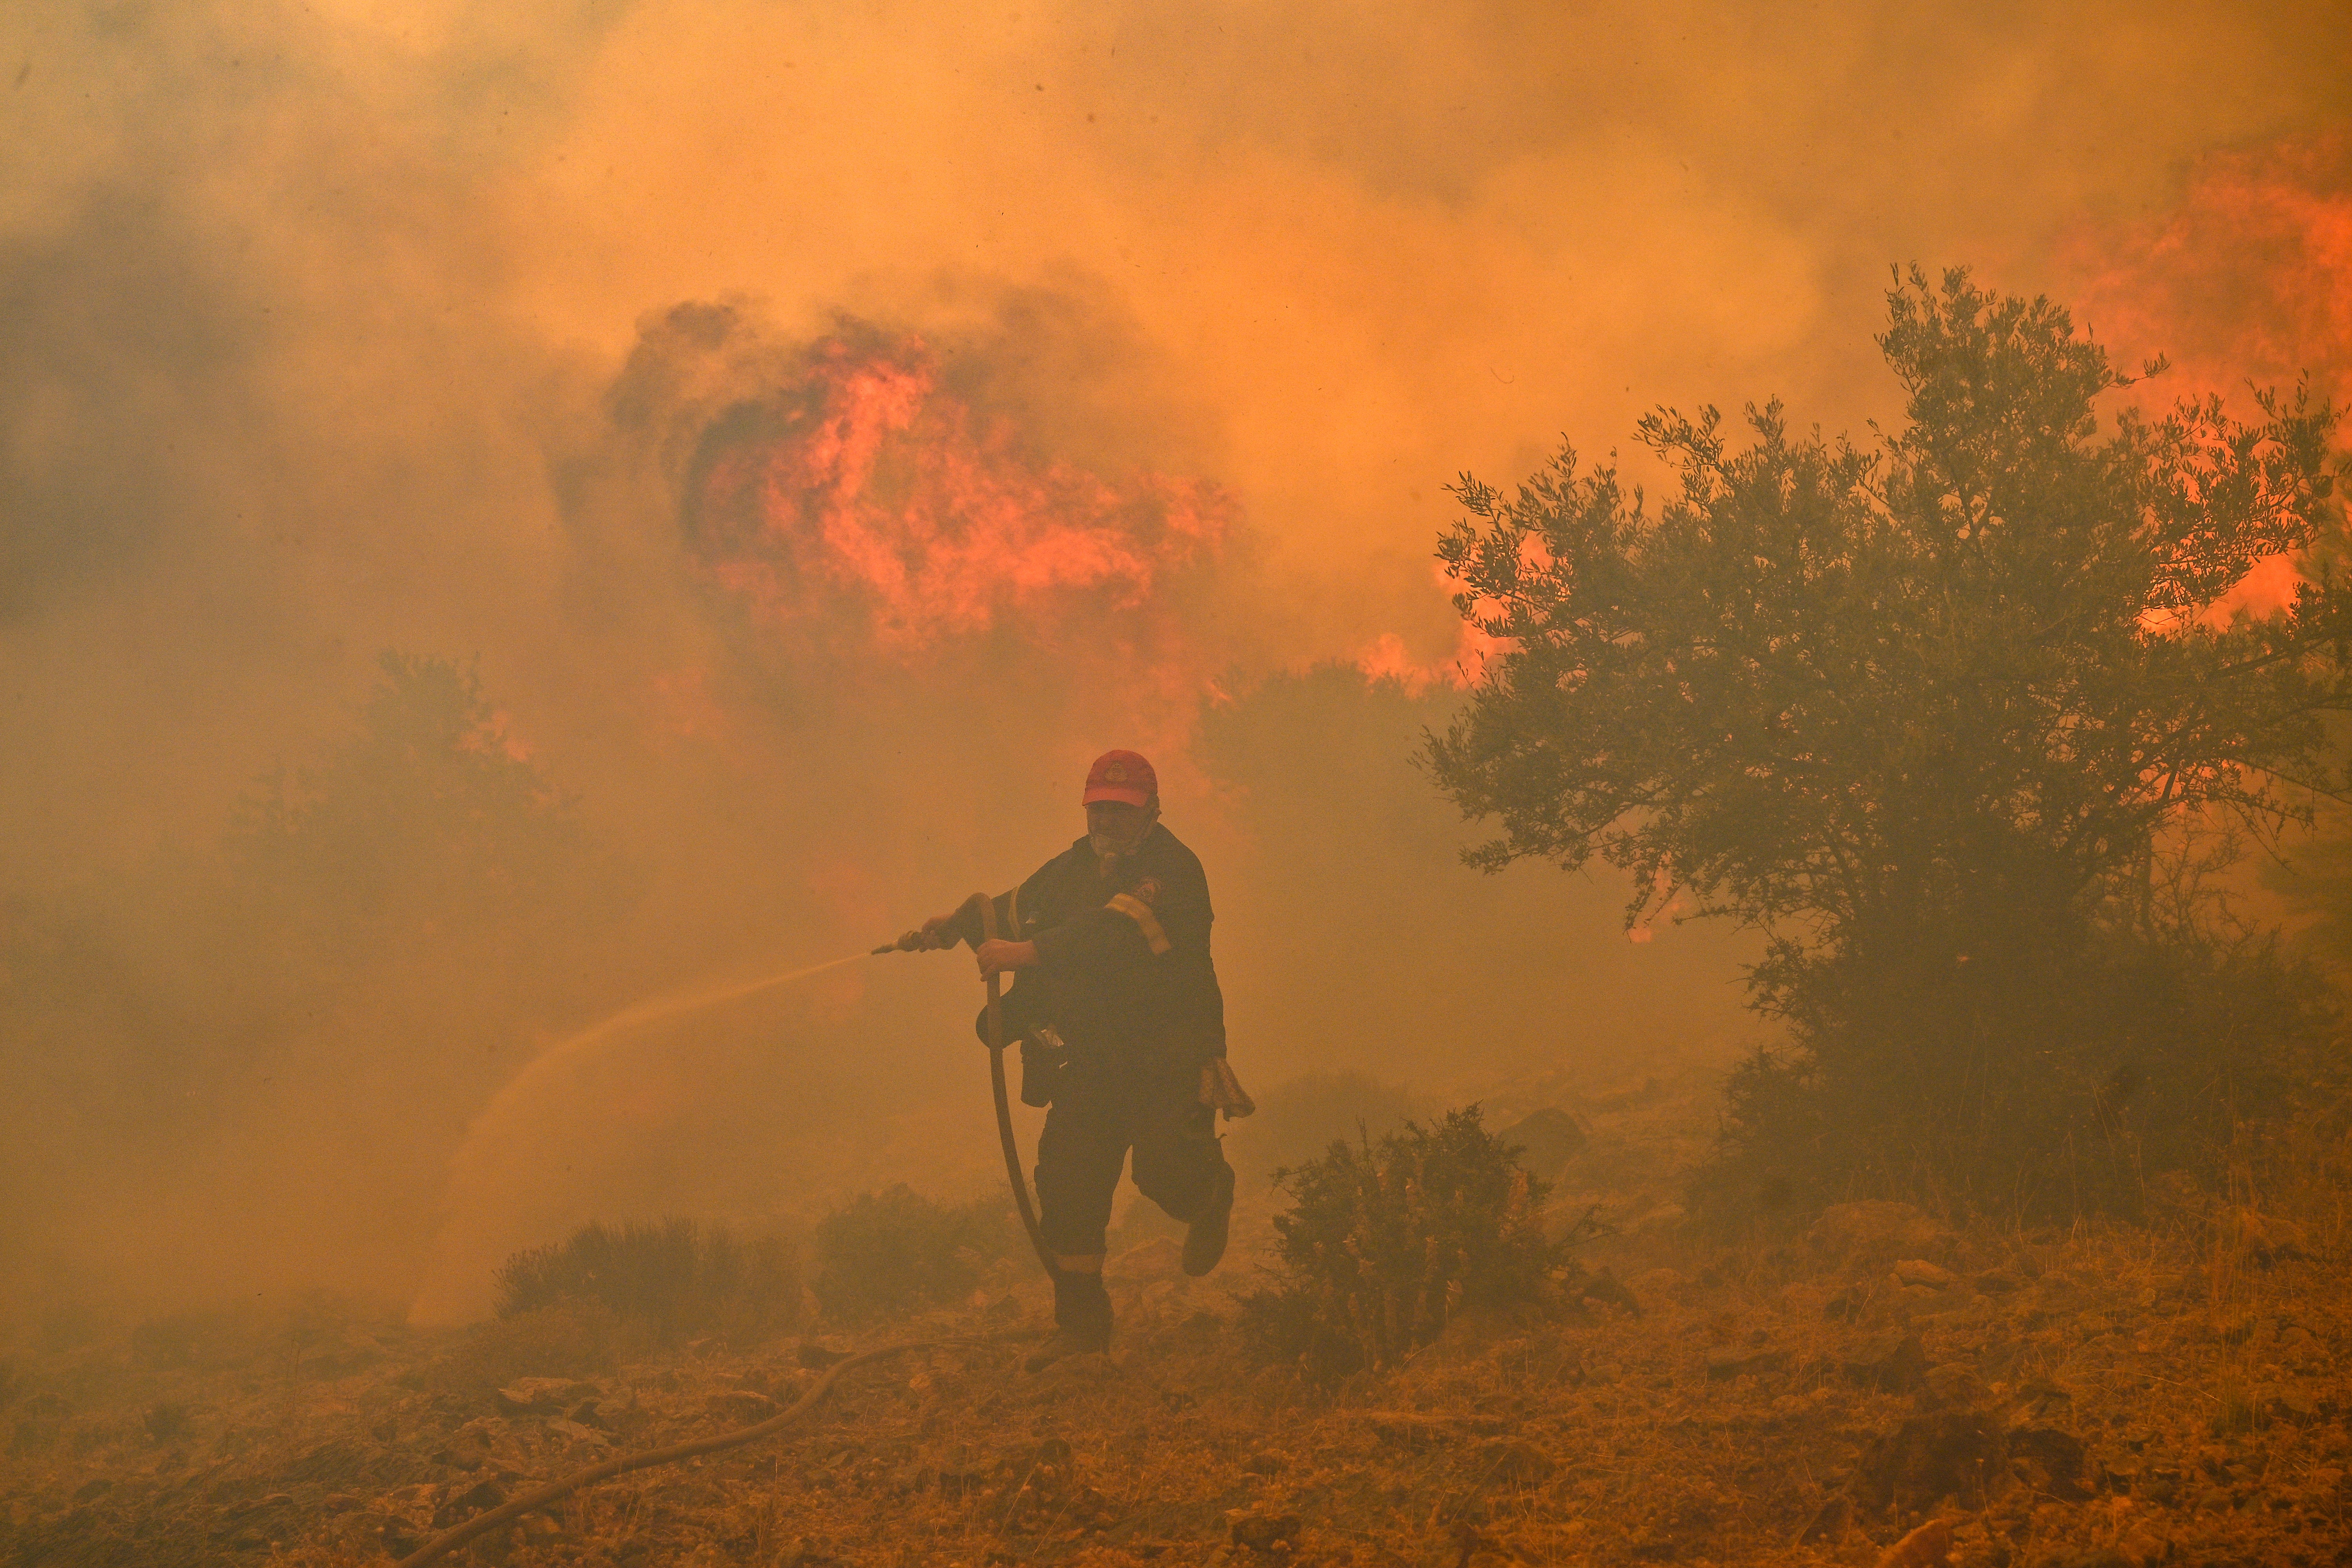 A fireman runs away from blazes as he tries to control a wildfire in New Peramos, near Athens